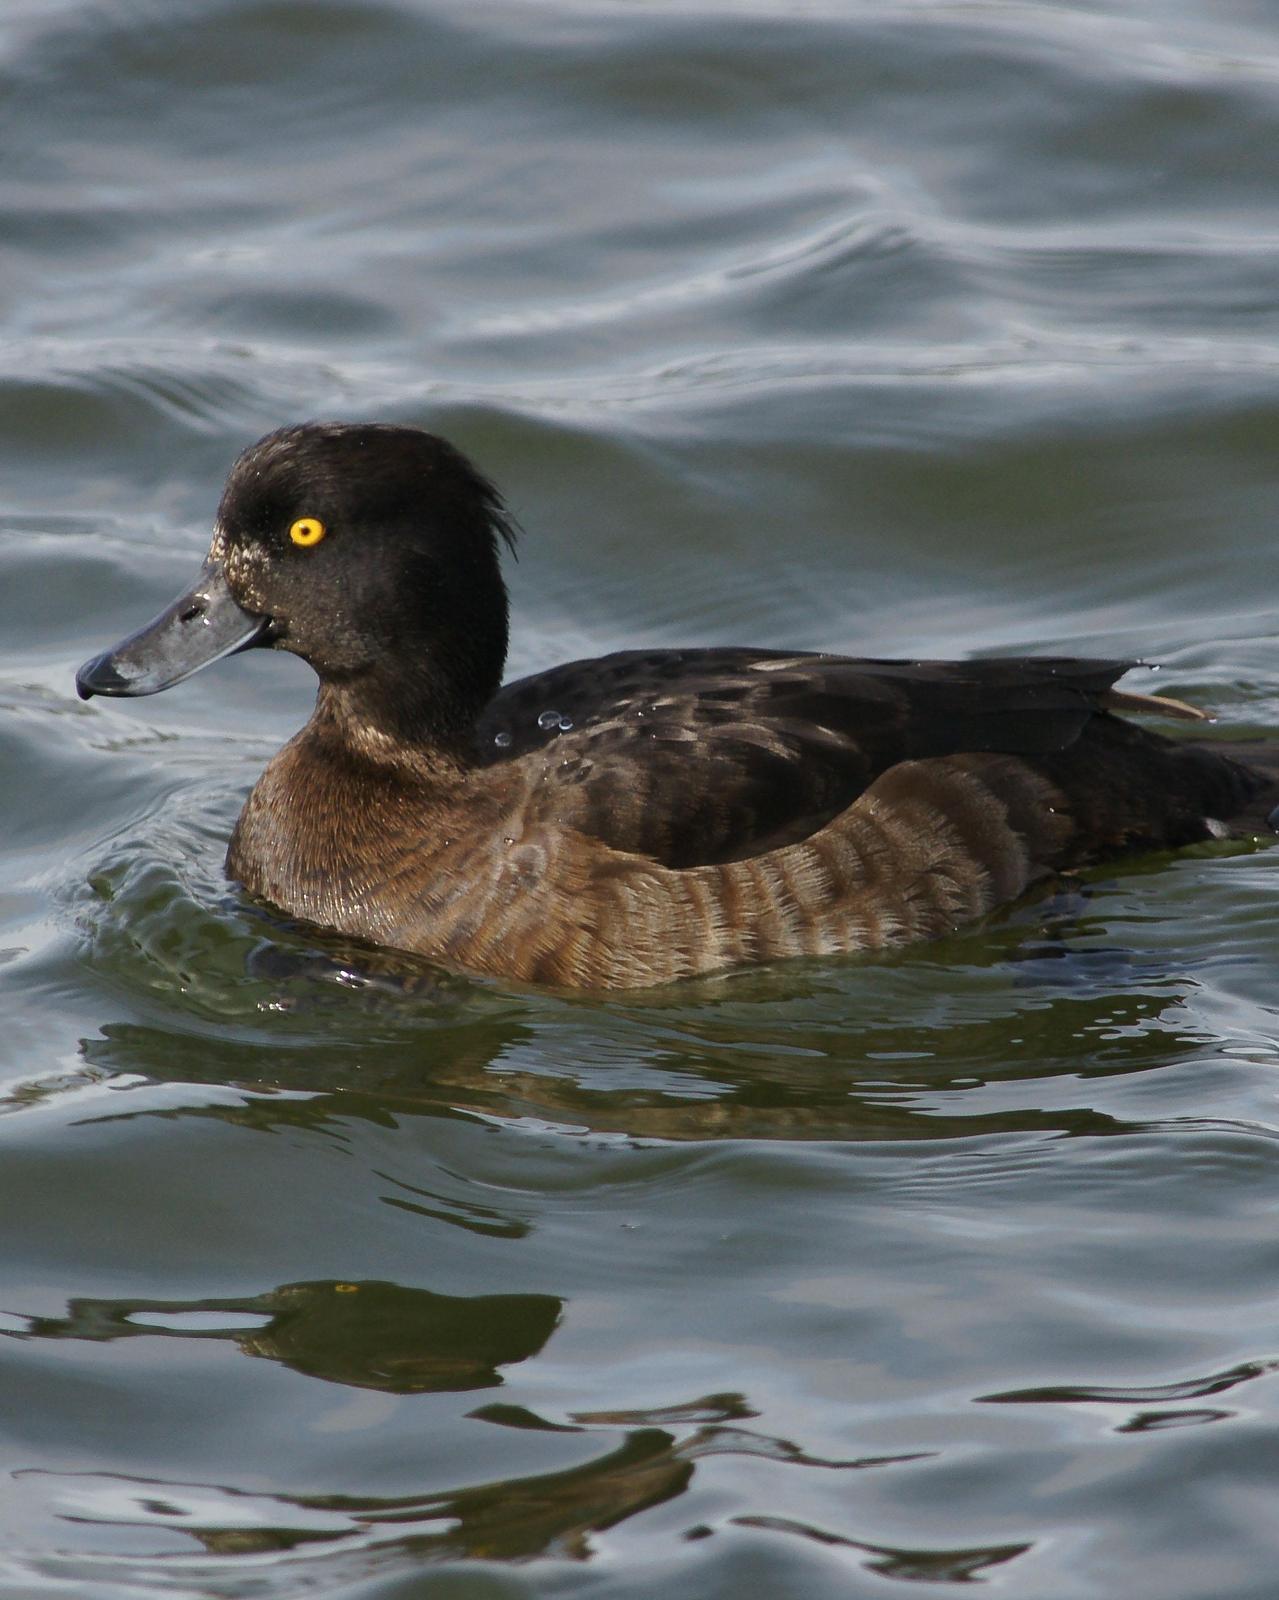 Tufted Duck Photo by Steve Percival